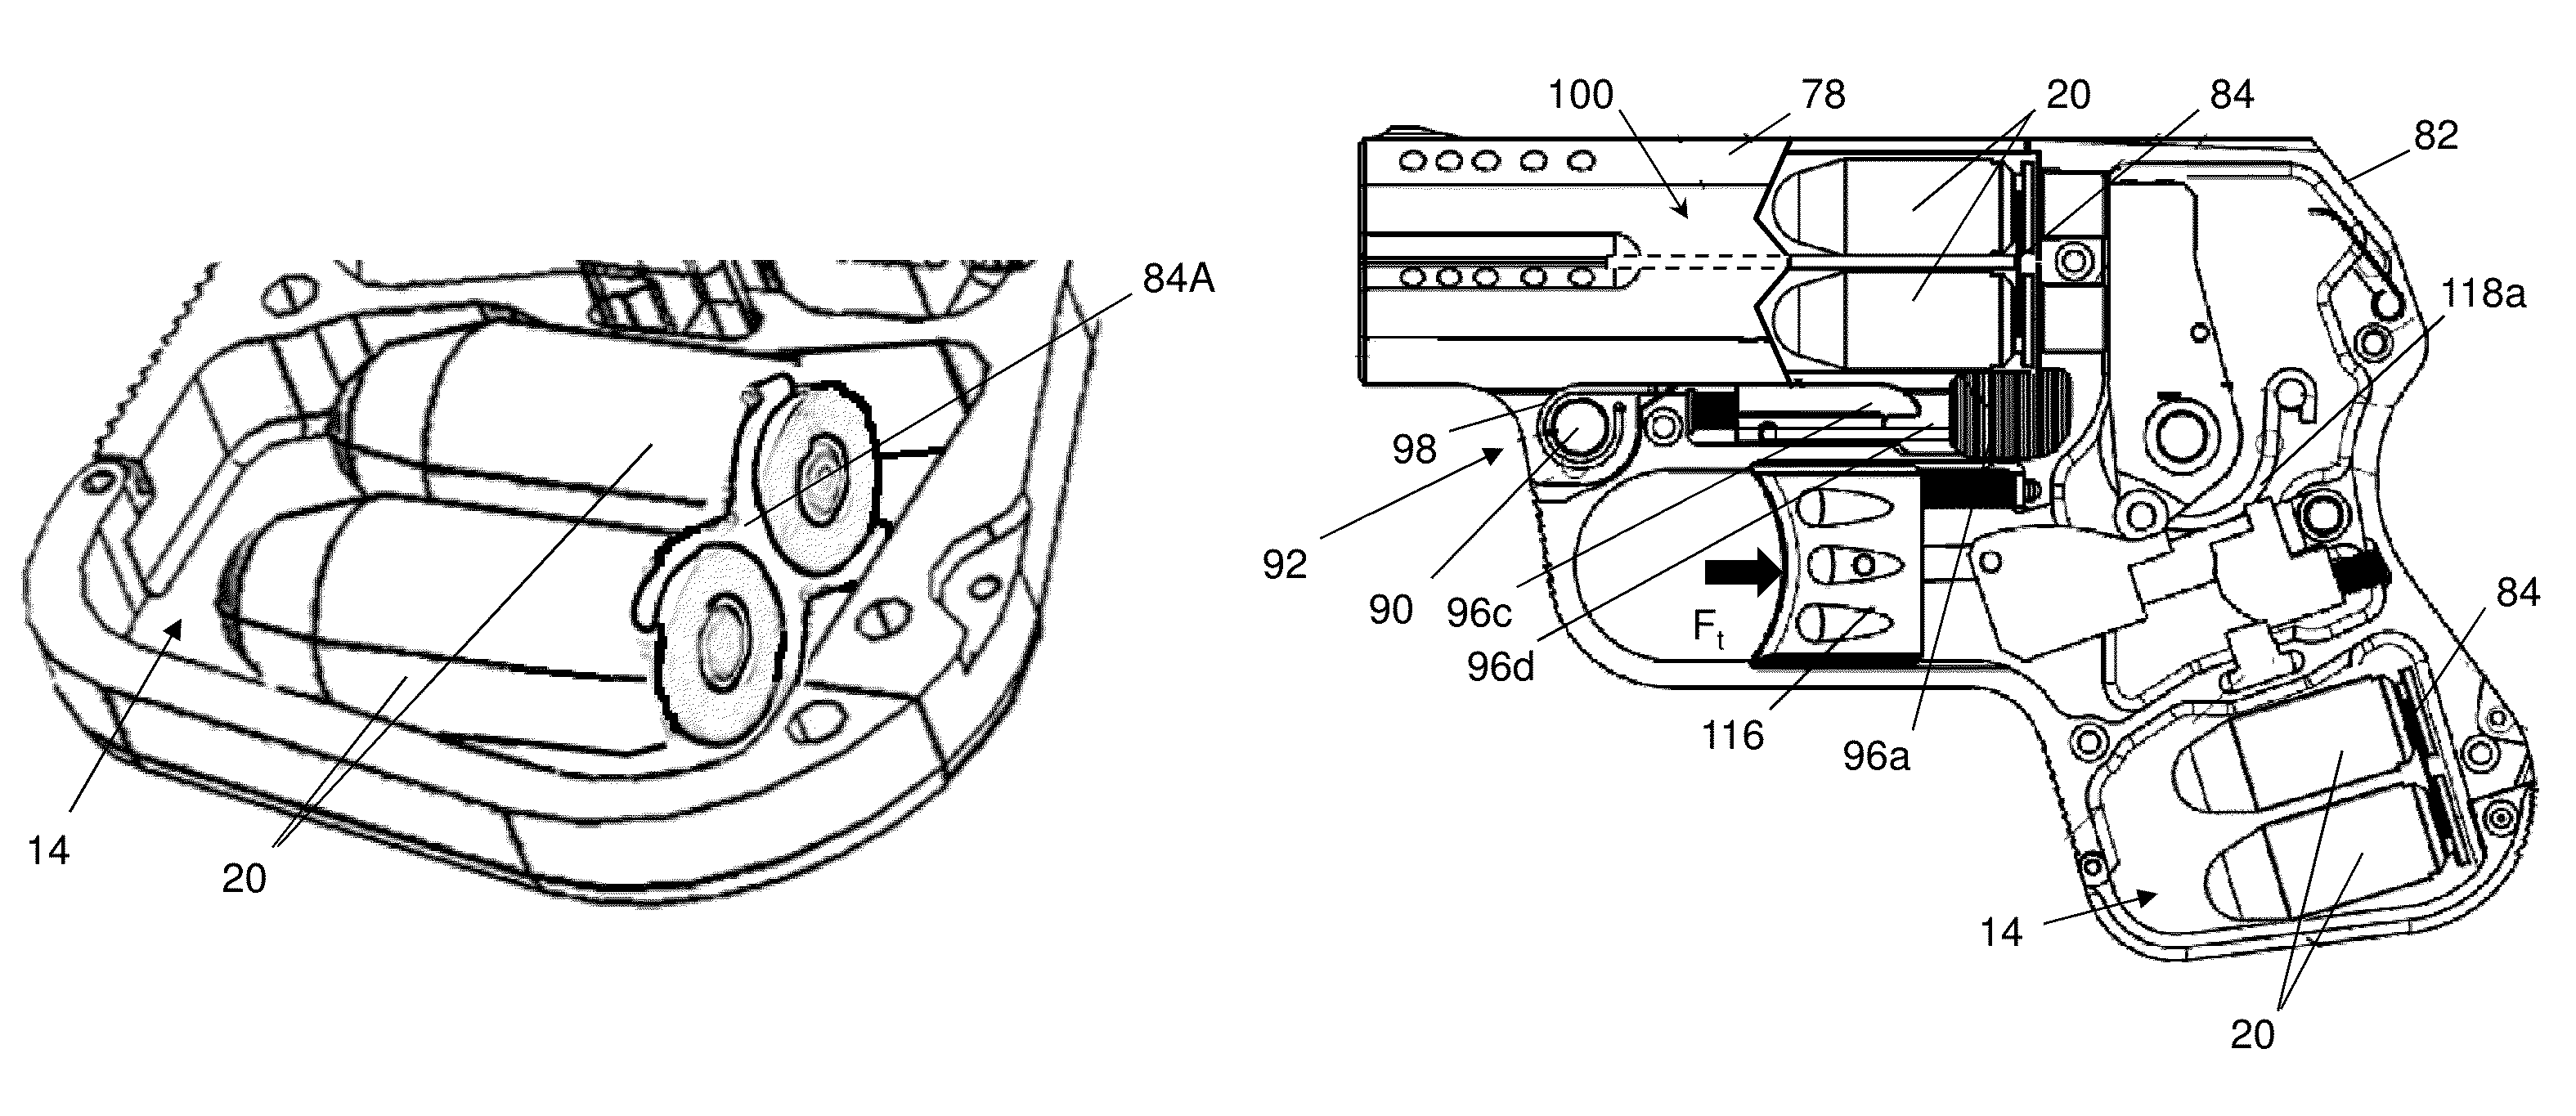 Firearm having ammunition compartment with H-clip and quick-change barrel with variable diameter bore and optional takedown pin